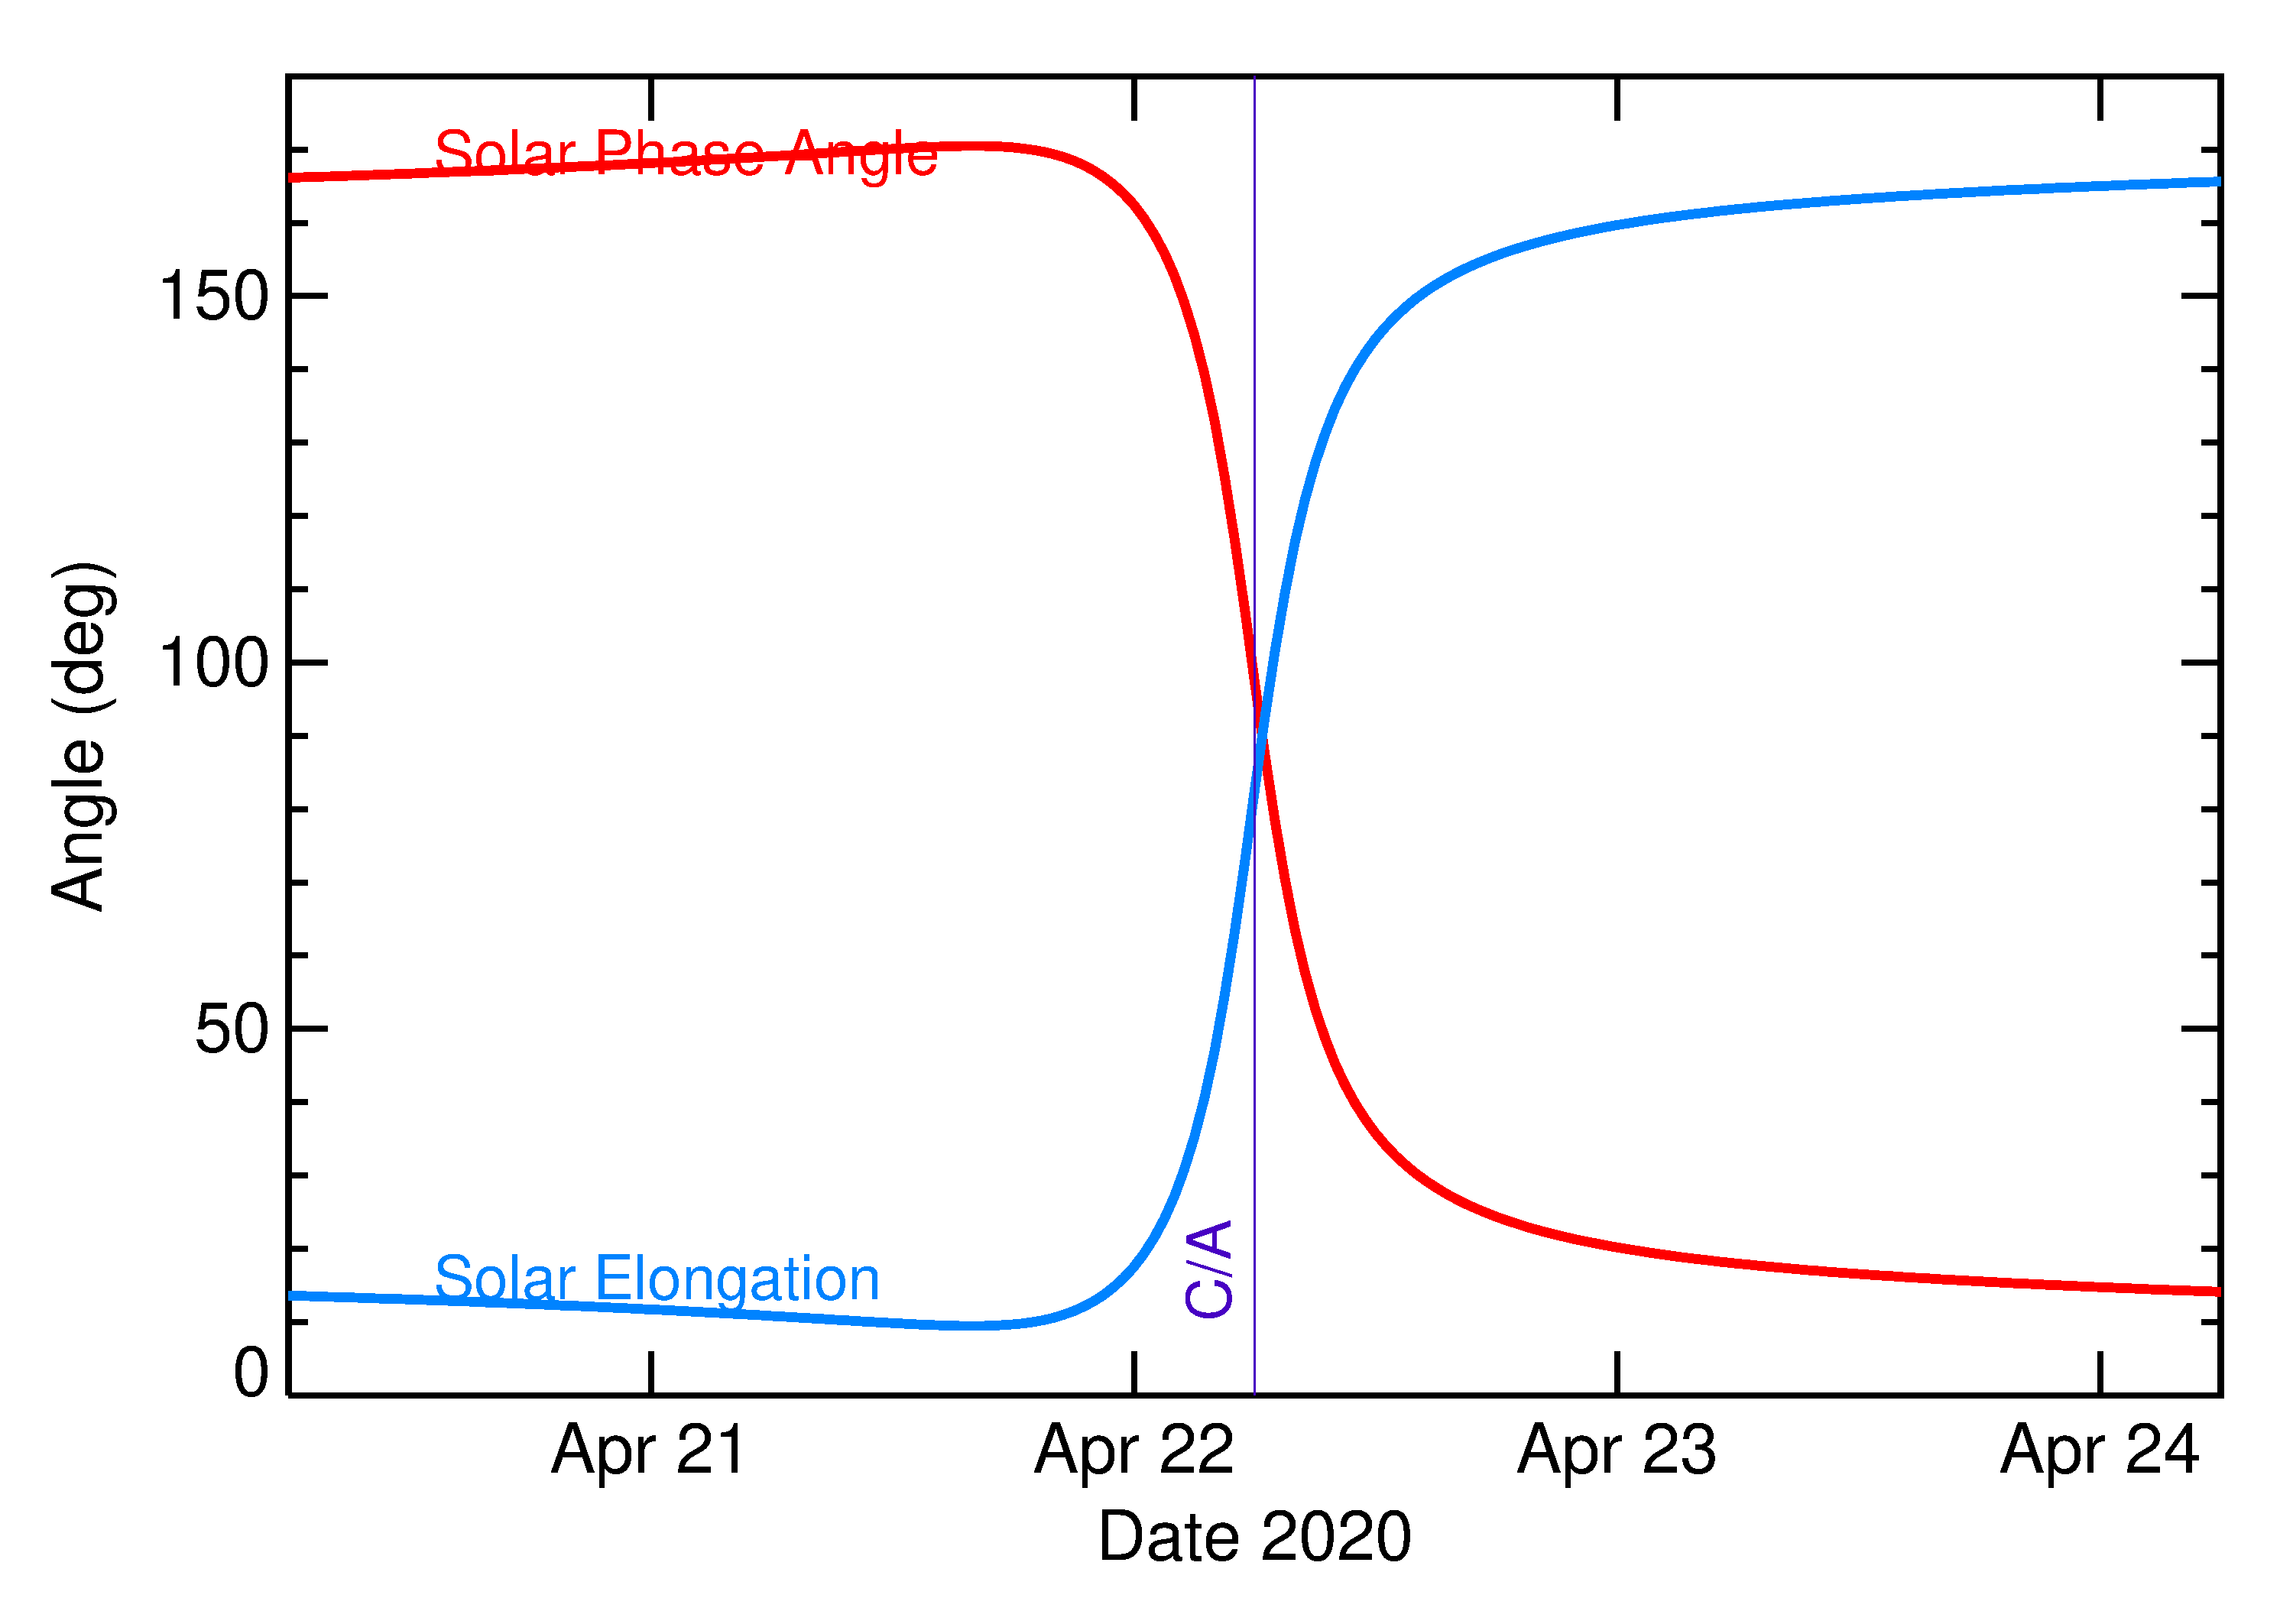 Solar Elongation and Solar Phase Angle of 2020 HM6 in the days around closest approach